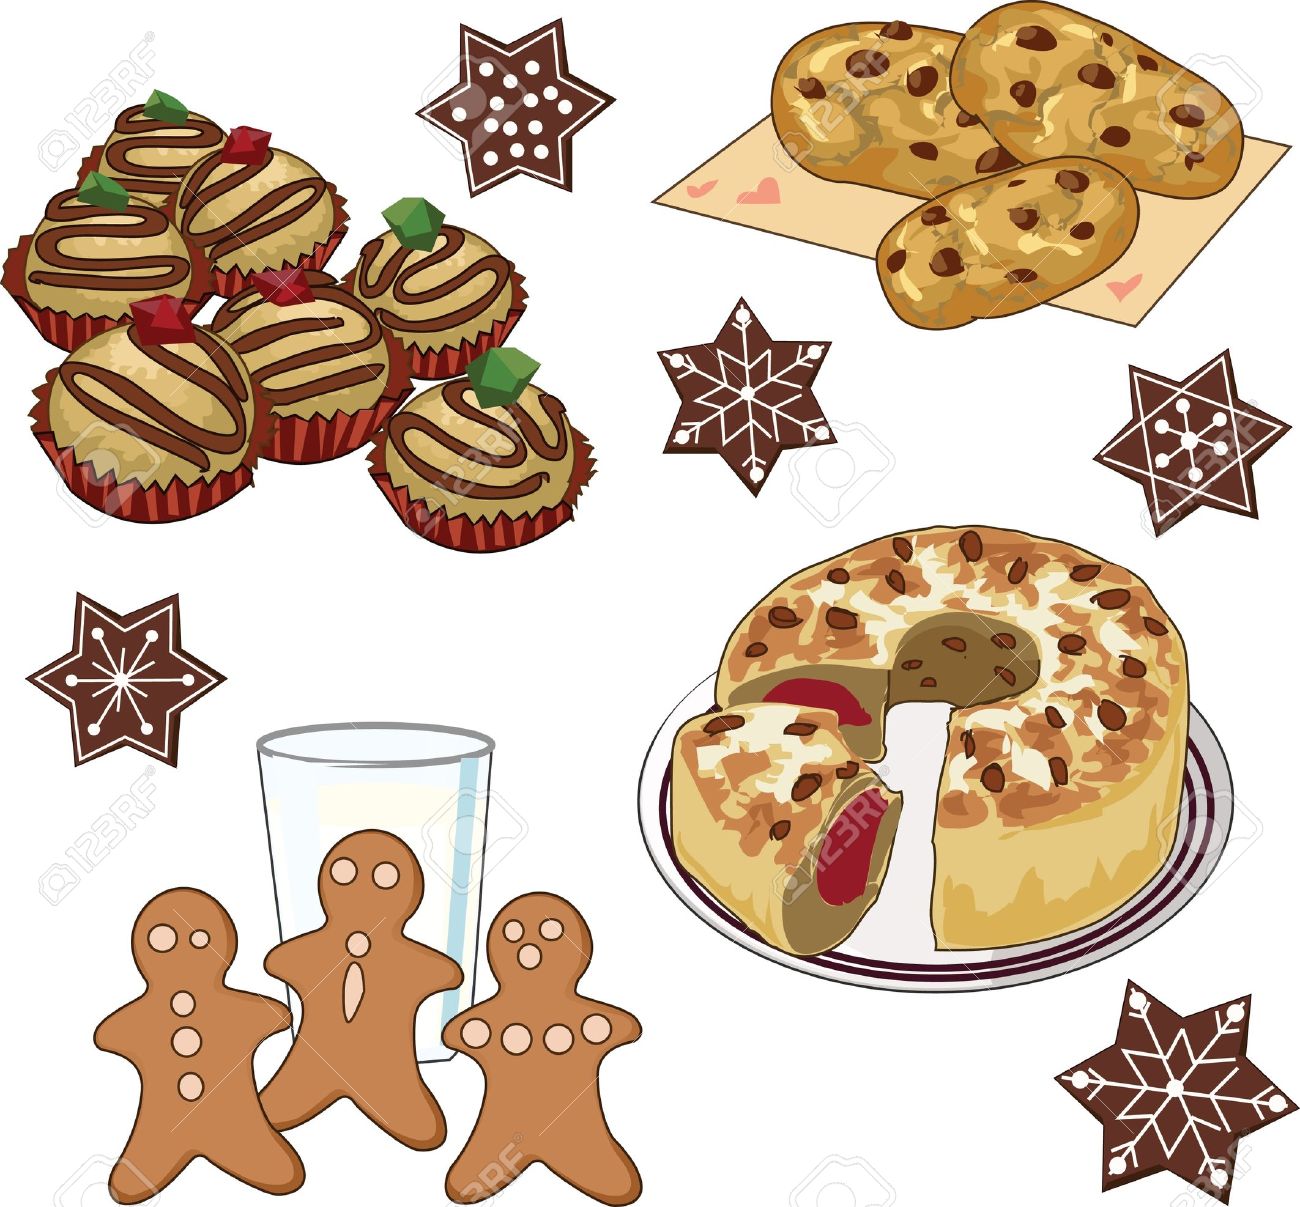 88 Baked Goods free clipart.